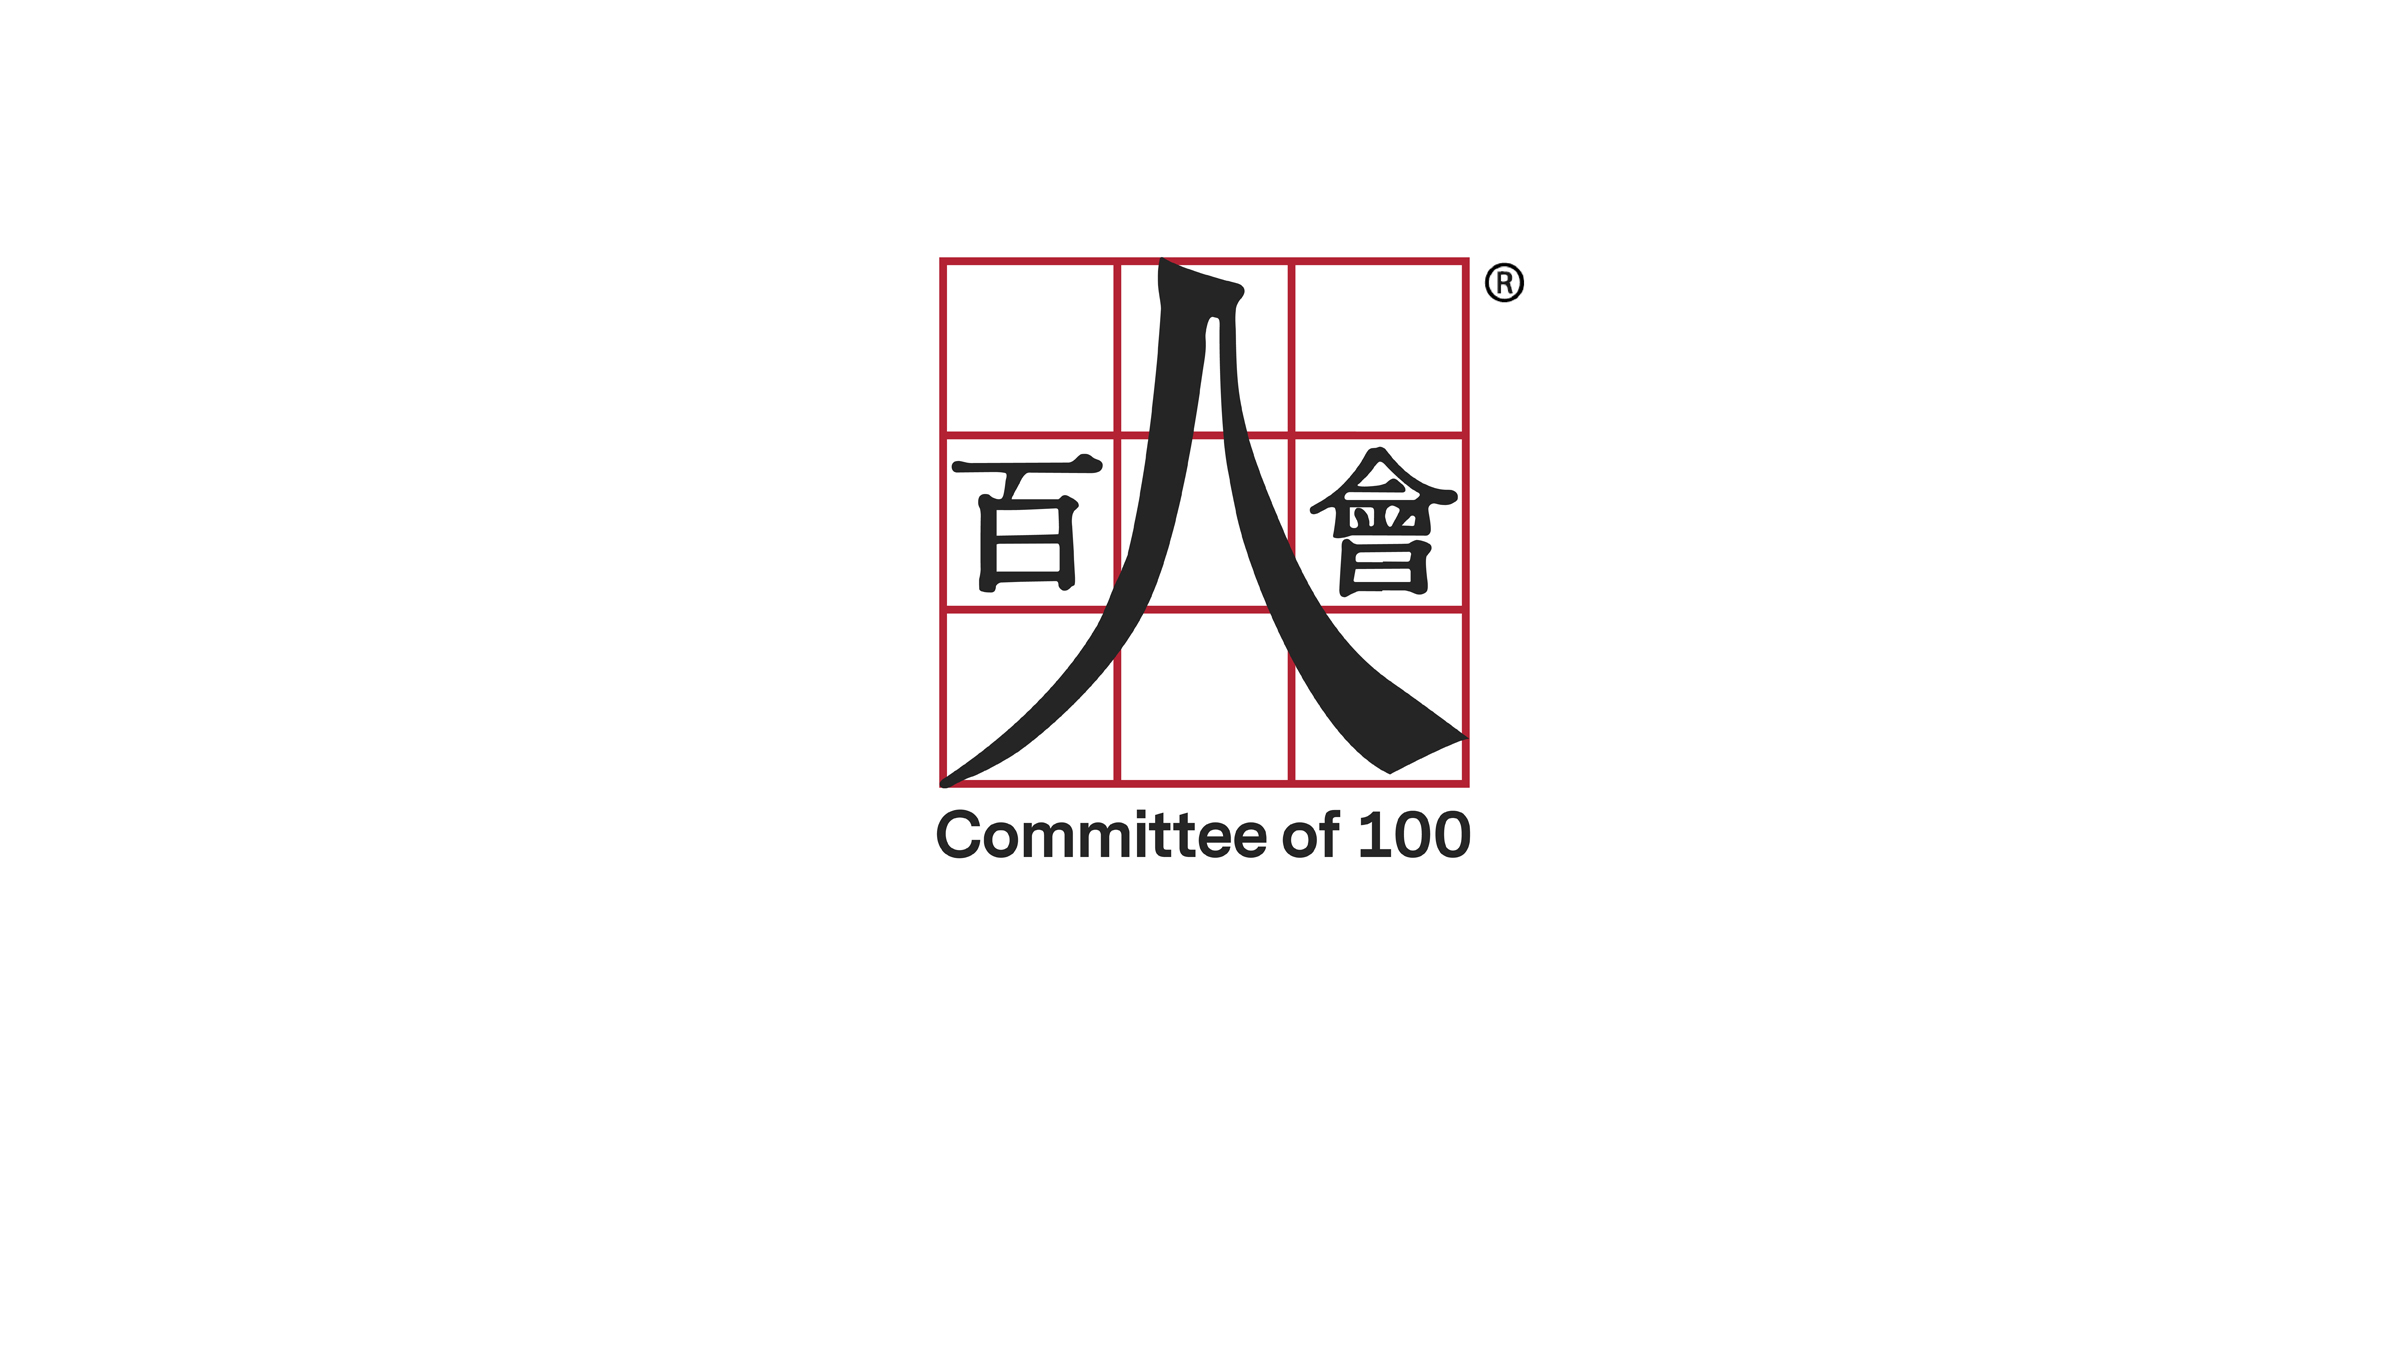 Committee 100 Annual Conference 2020 to be rescheduled